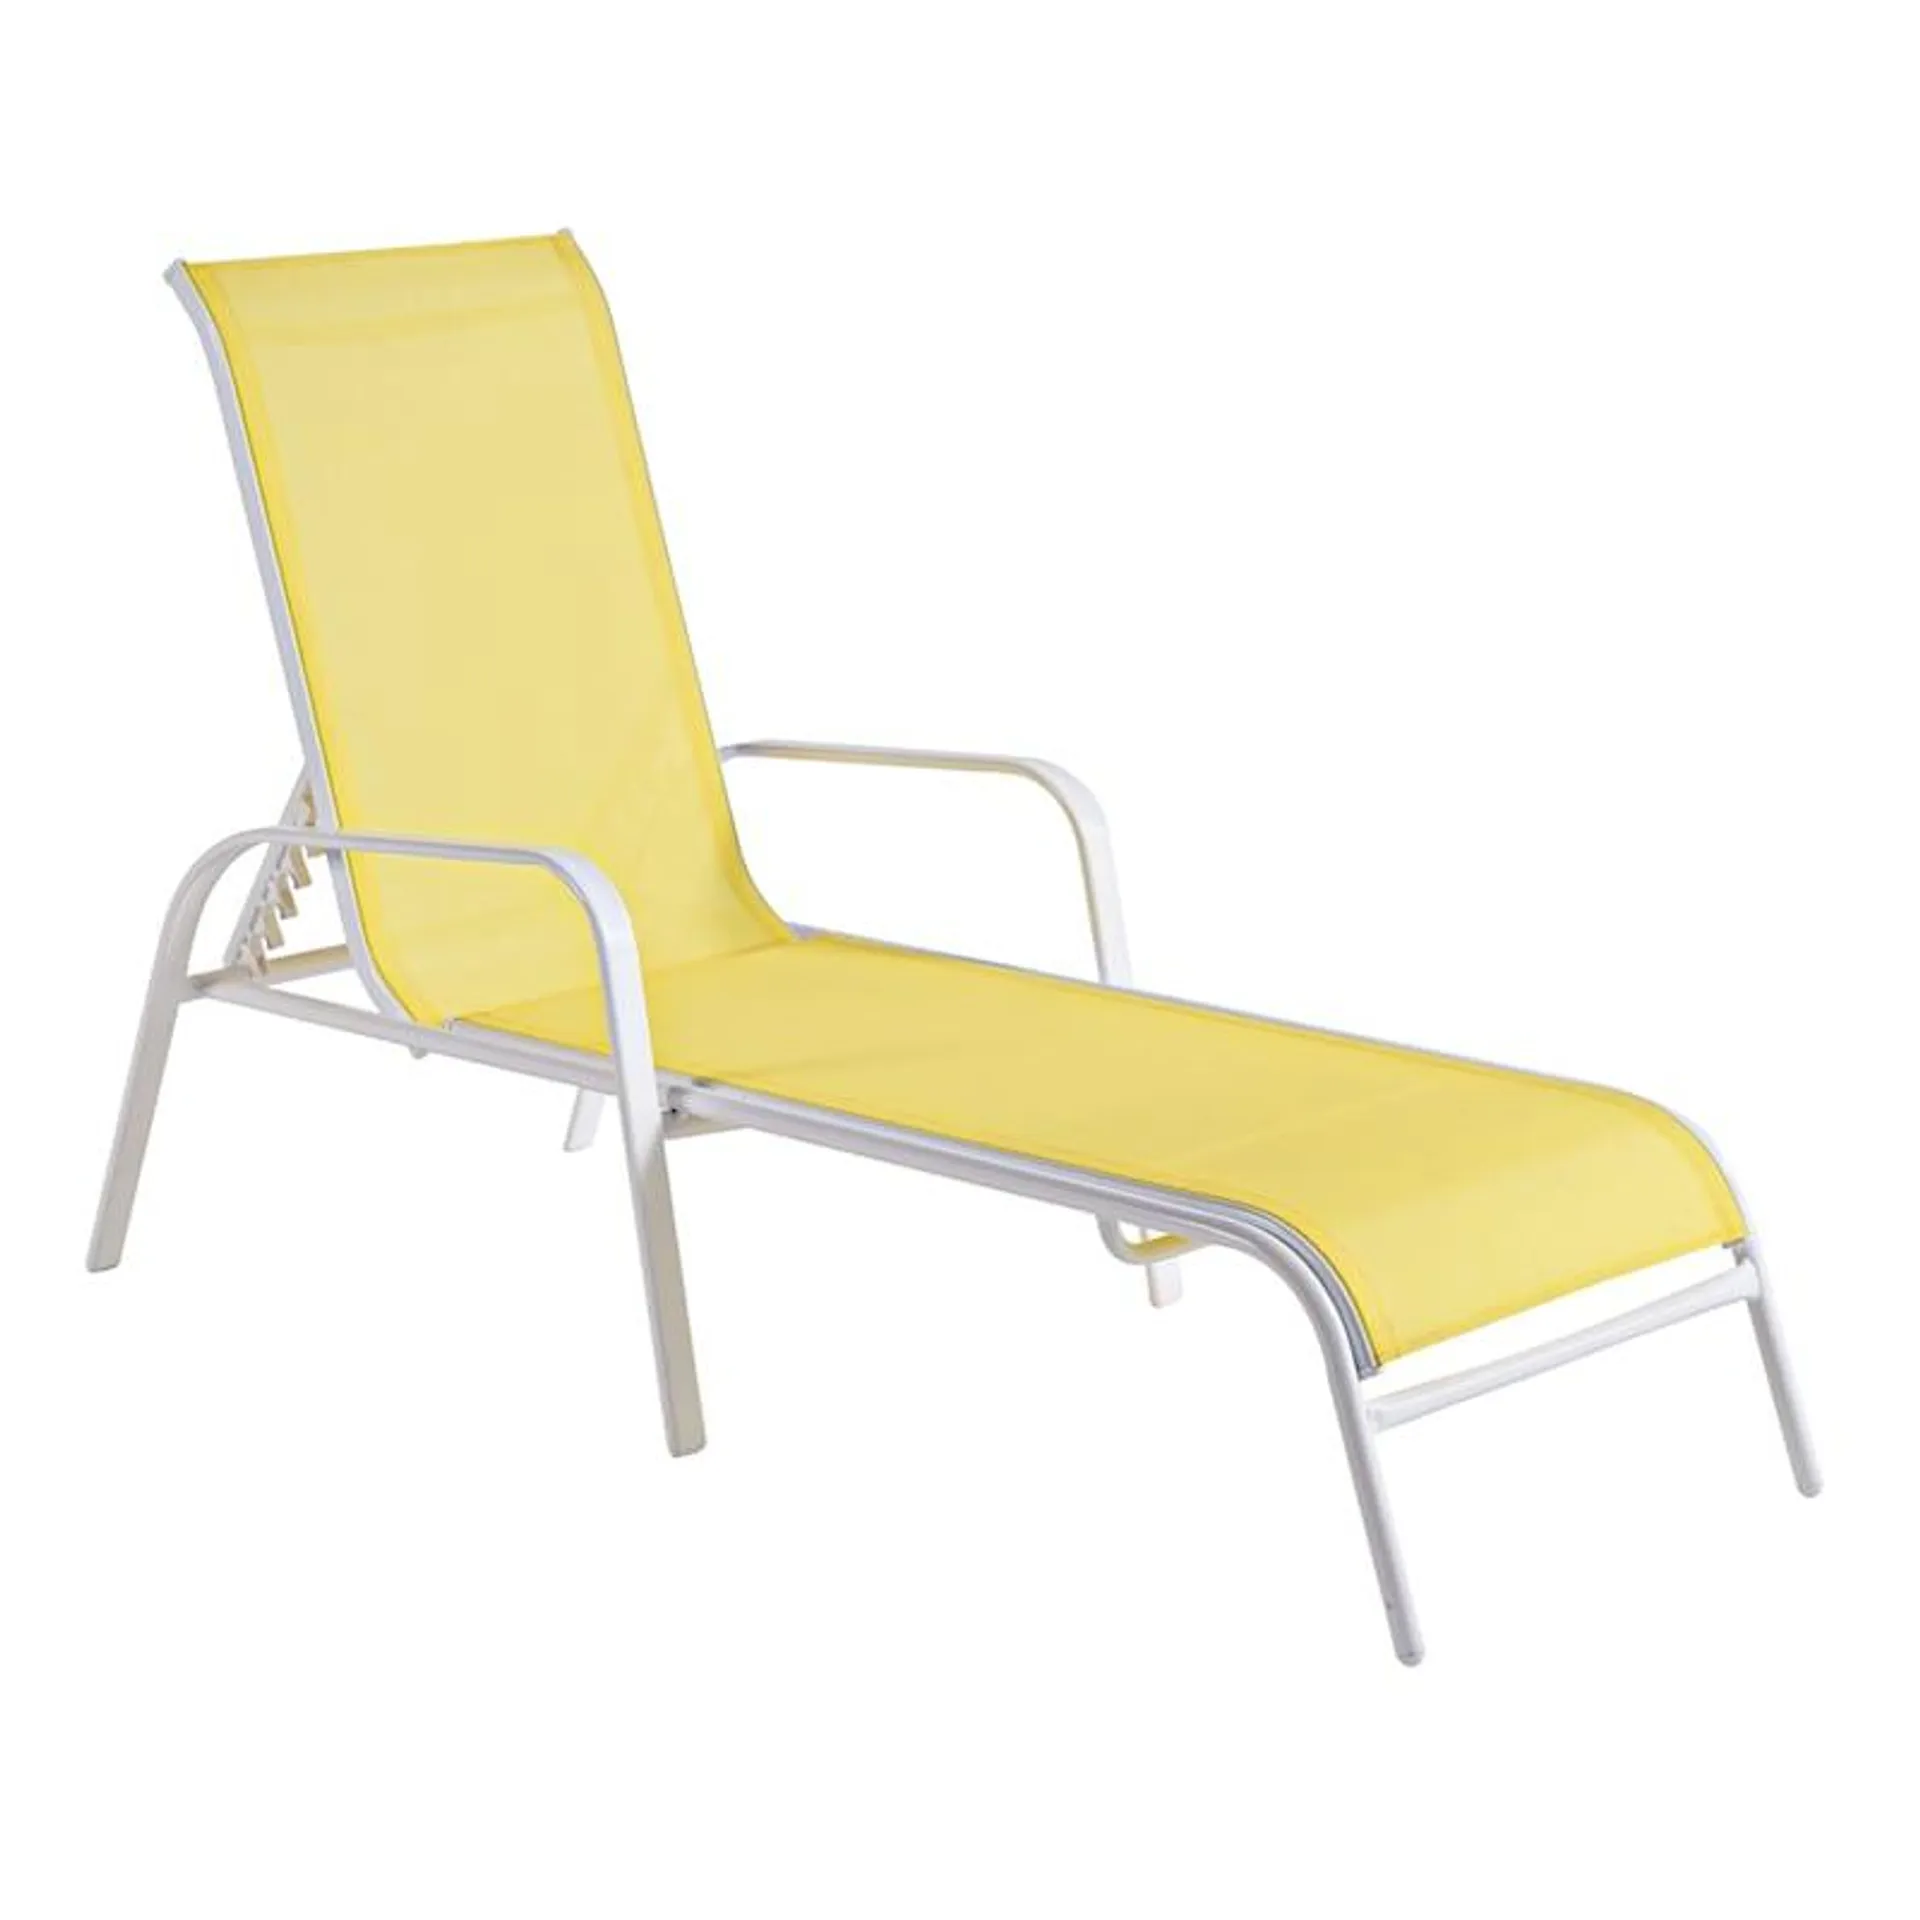 Stackable Yellow Sling Patio Chaise Lounge Chair with White Frame